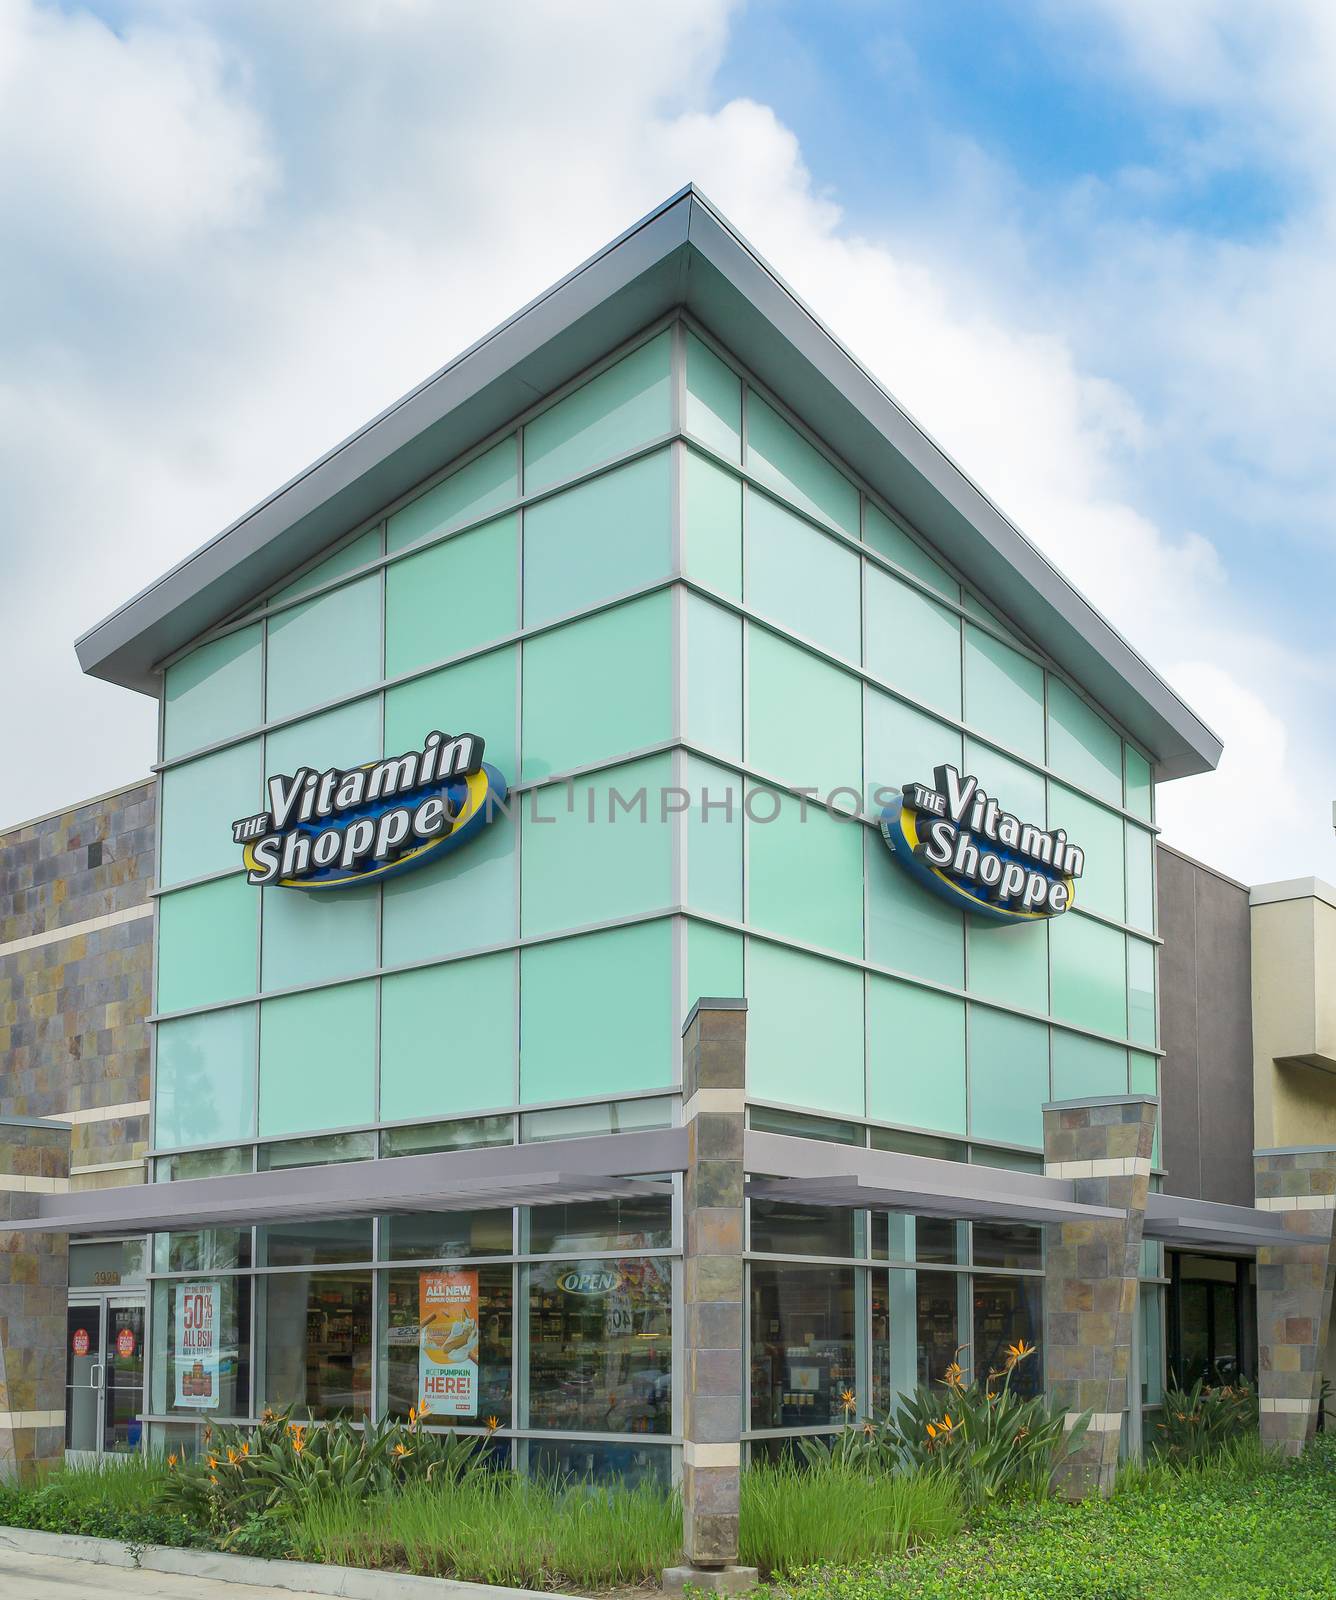 The Vitamin Shoppe Exterior by wolterk